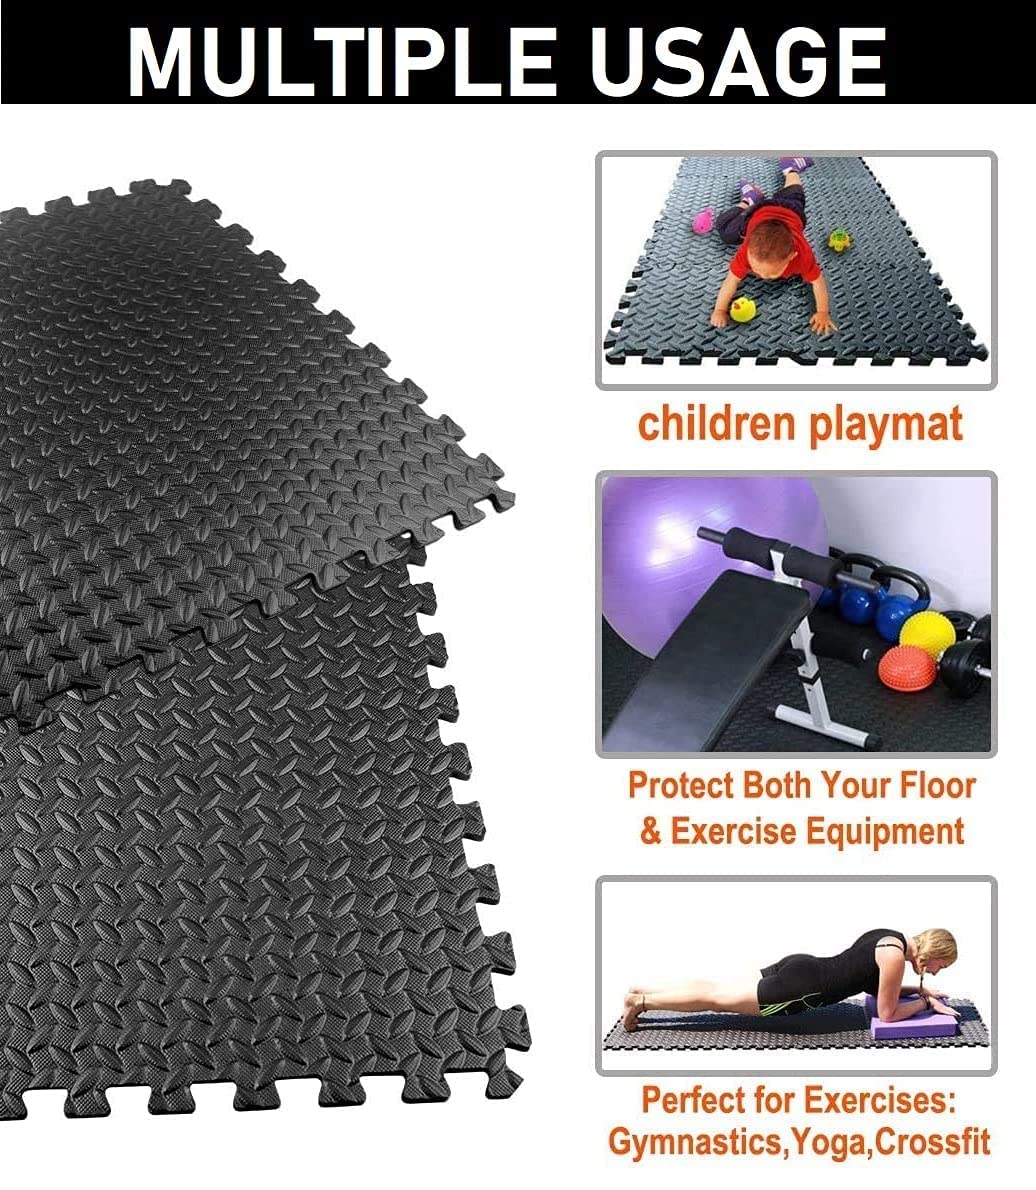 1 Inch/ 25 mm Thick Gym Floor mats for Heavy Workout at Home,Puzzle Floor mat for Gym Exercise, Yoga Interlocking EVA Foam for Kids(60 * 60cm)